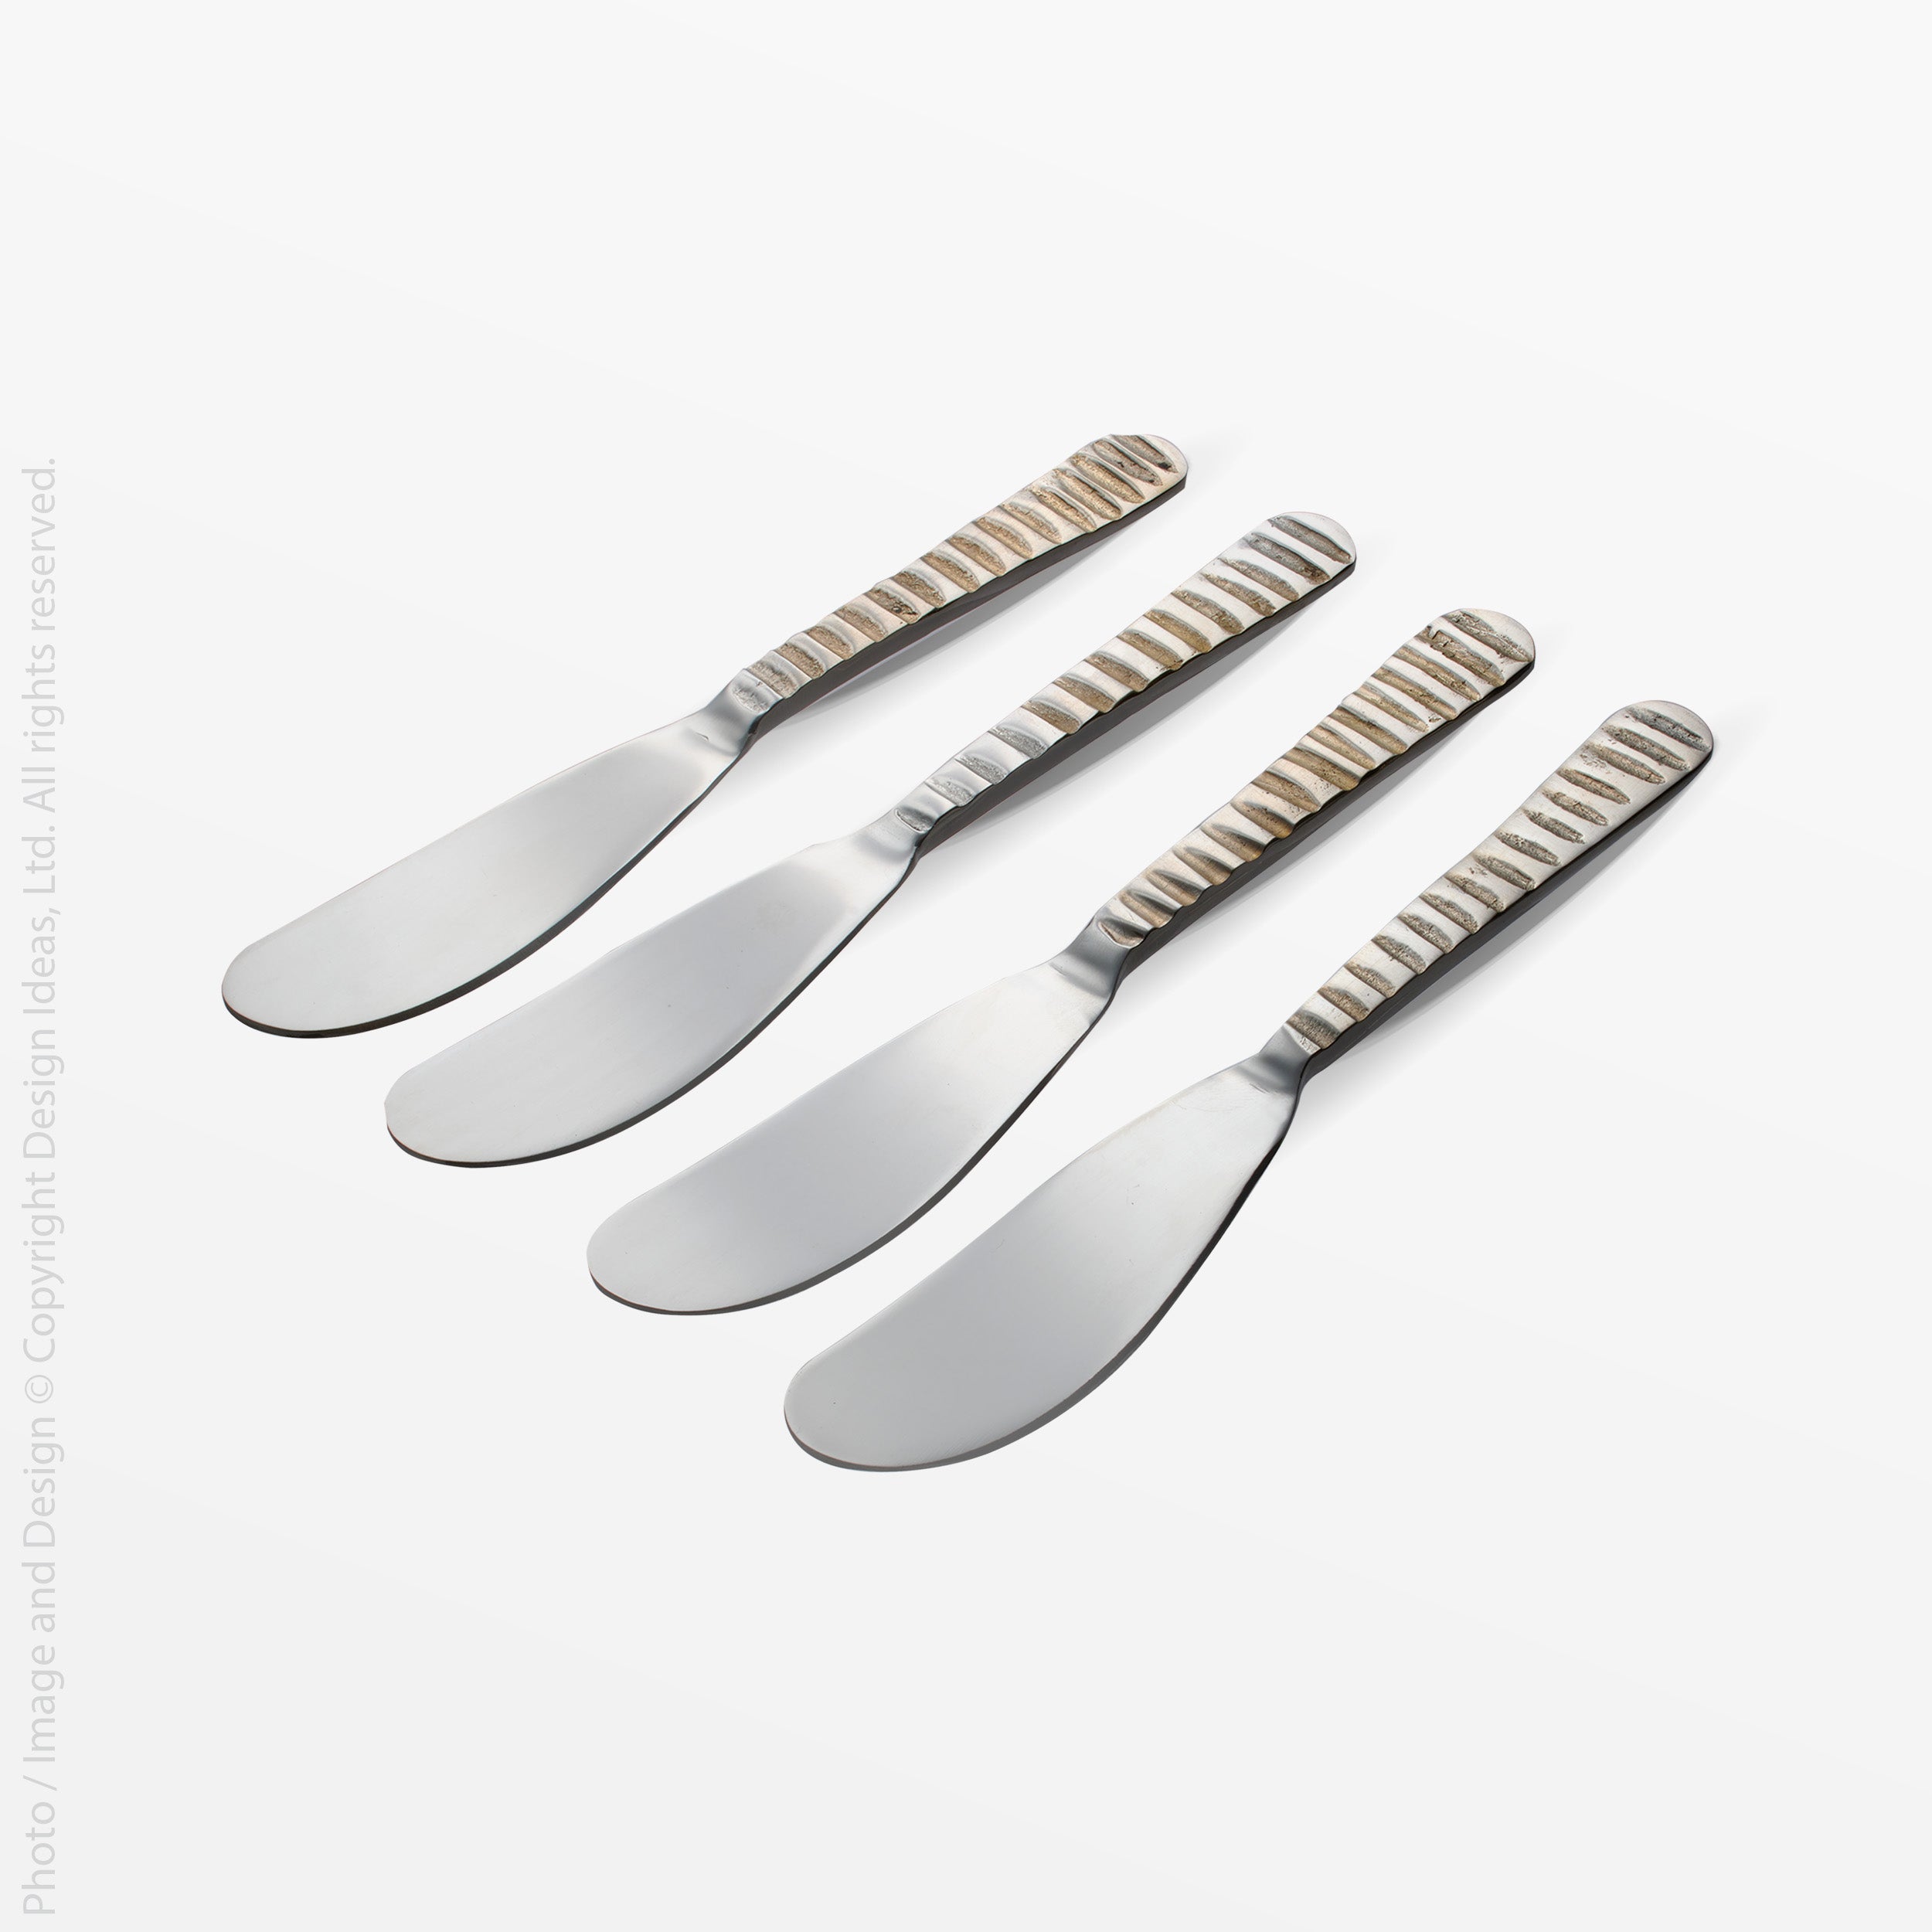 Ravine™ Hand Forged Stainless Steel Cheese Spreaders (Set of 4)